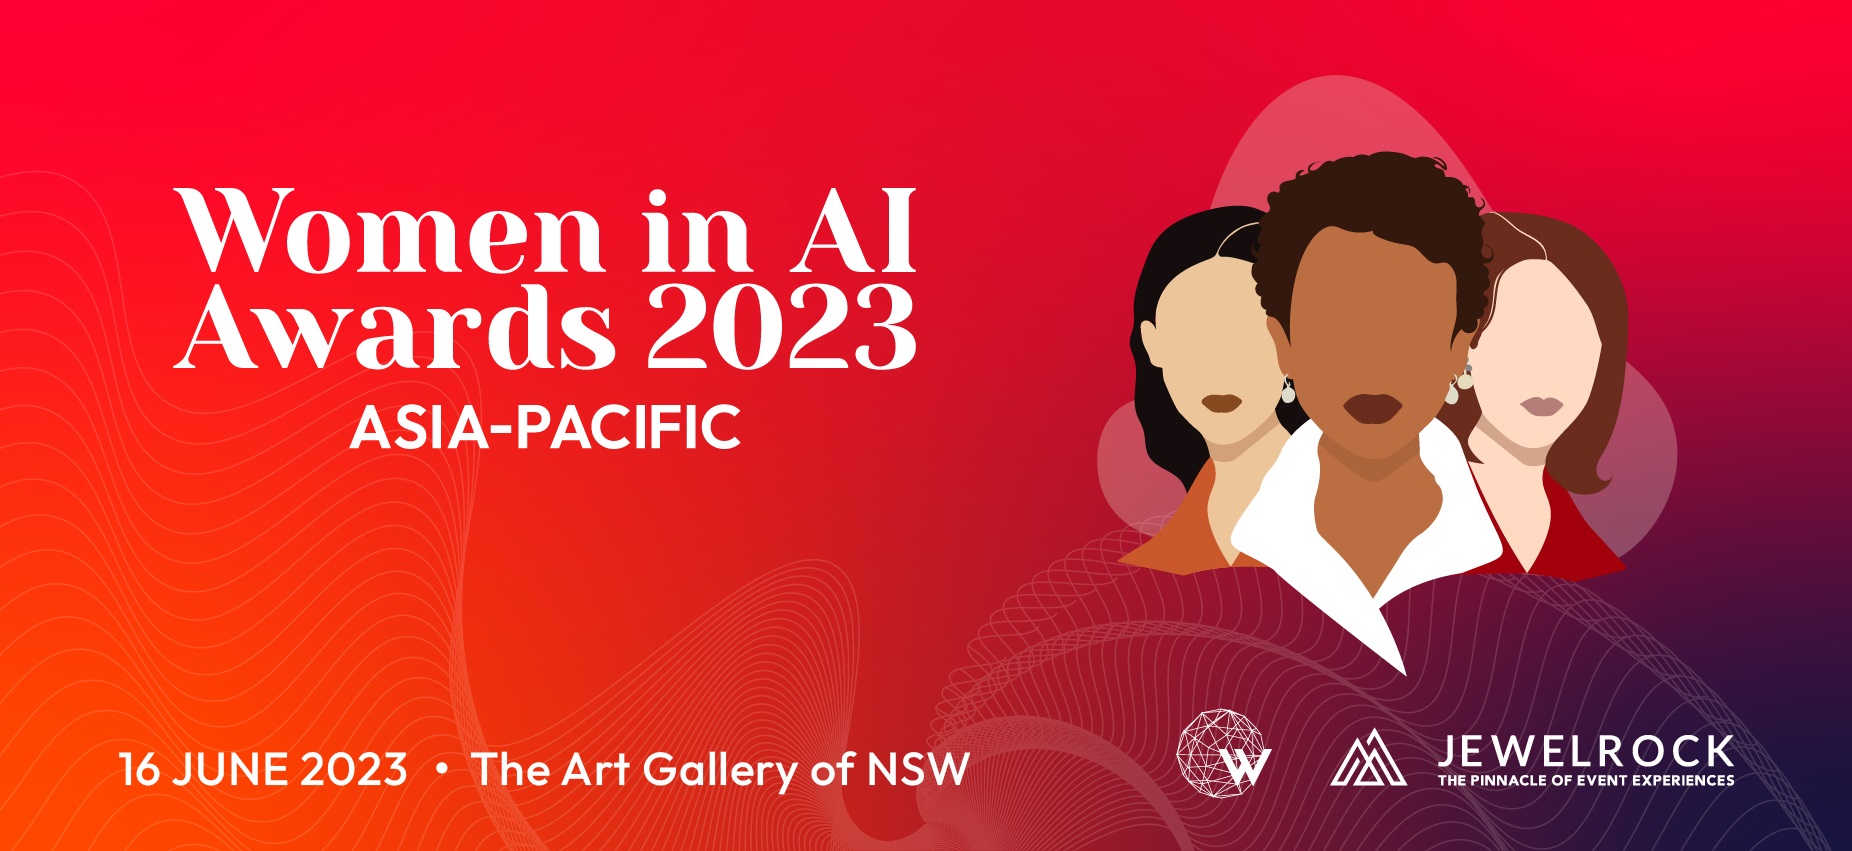 Women in AI Awards 2023 Asia-Pacific. 16 June 2023 The Art Gallery of NSW.